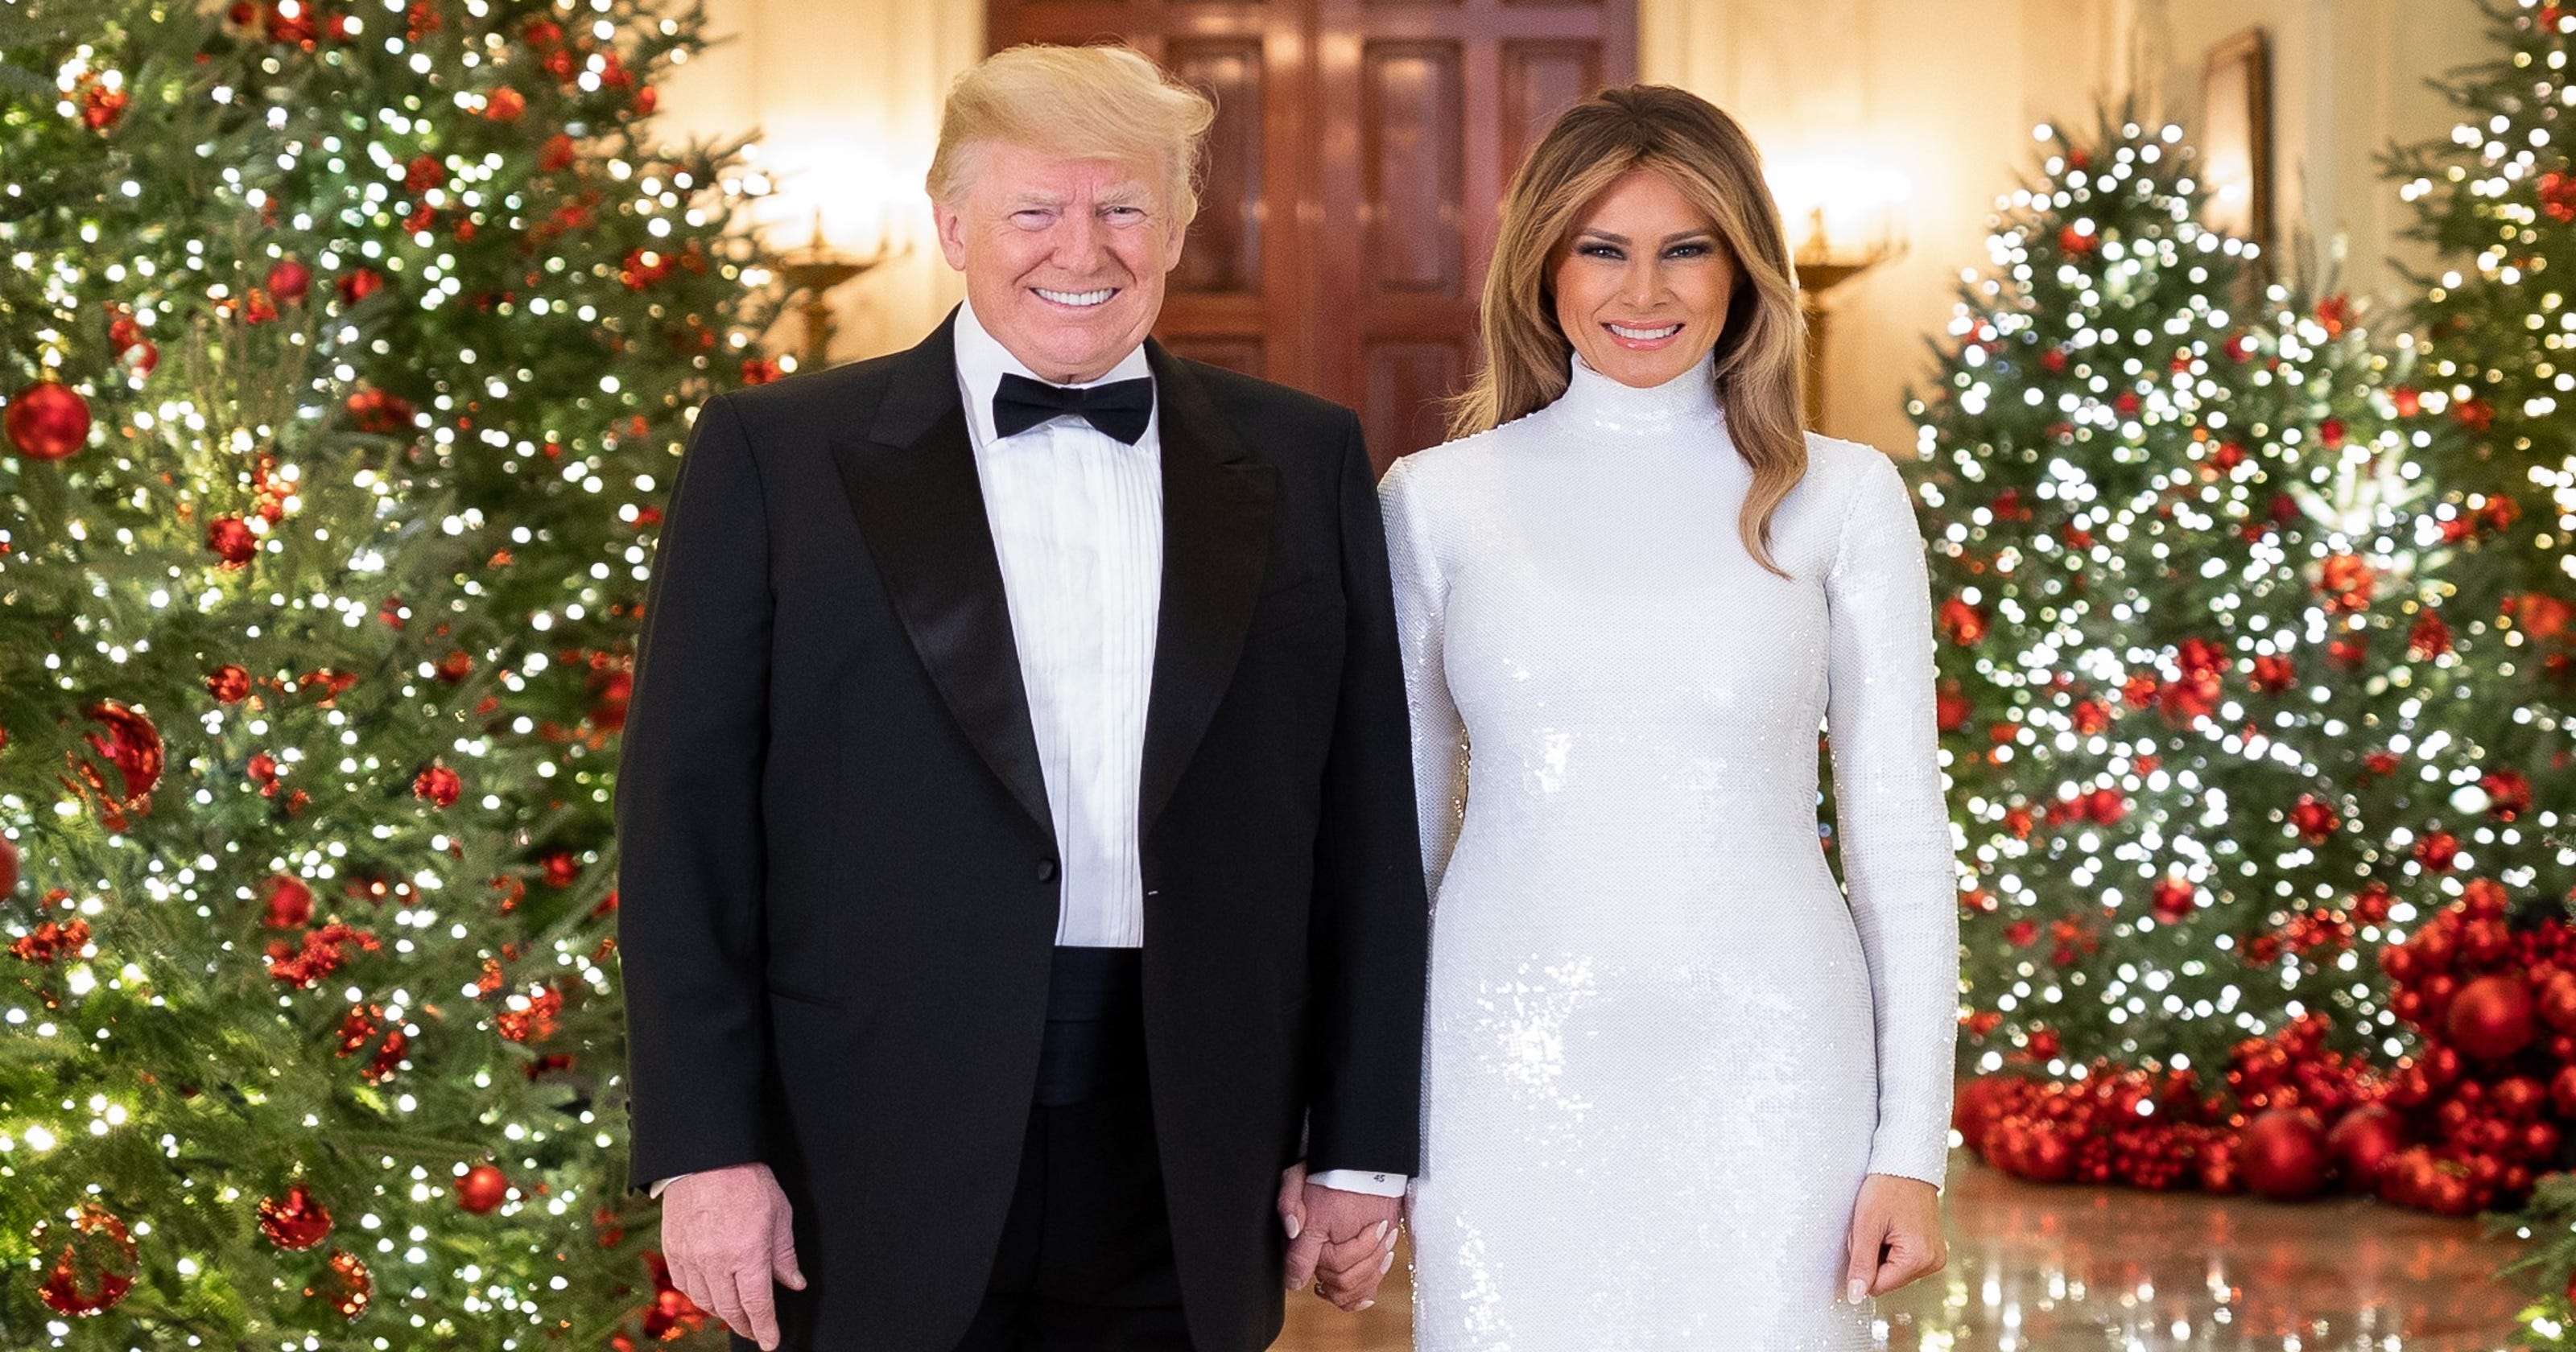 Donald Trump, Melania hold hands in official Christmas portrait